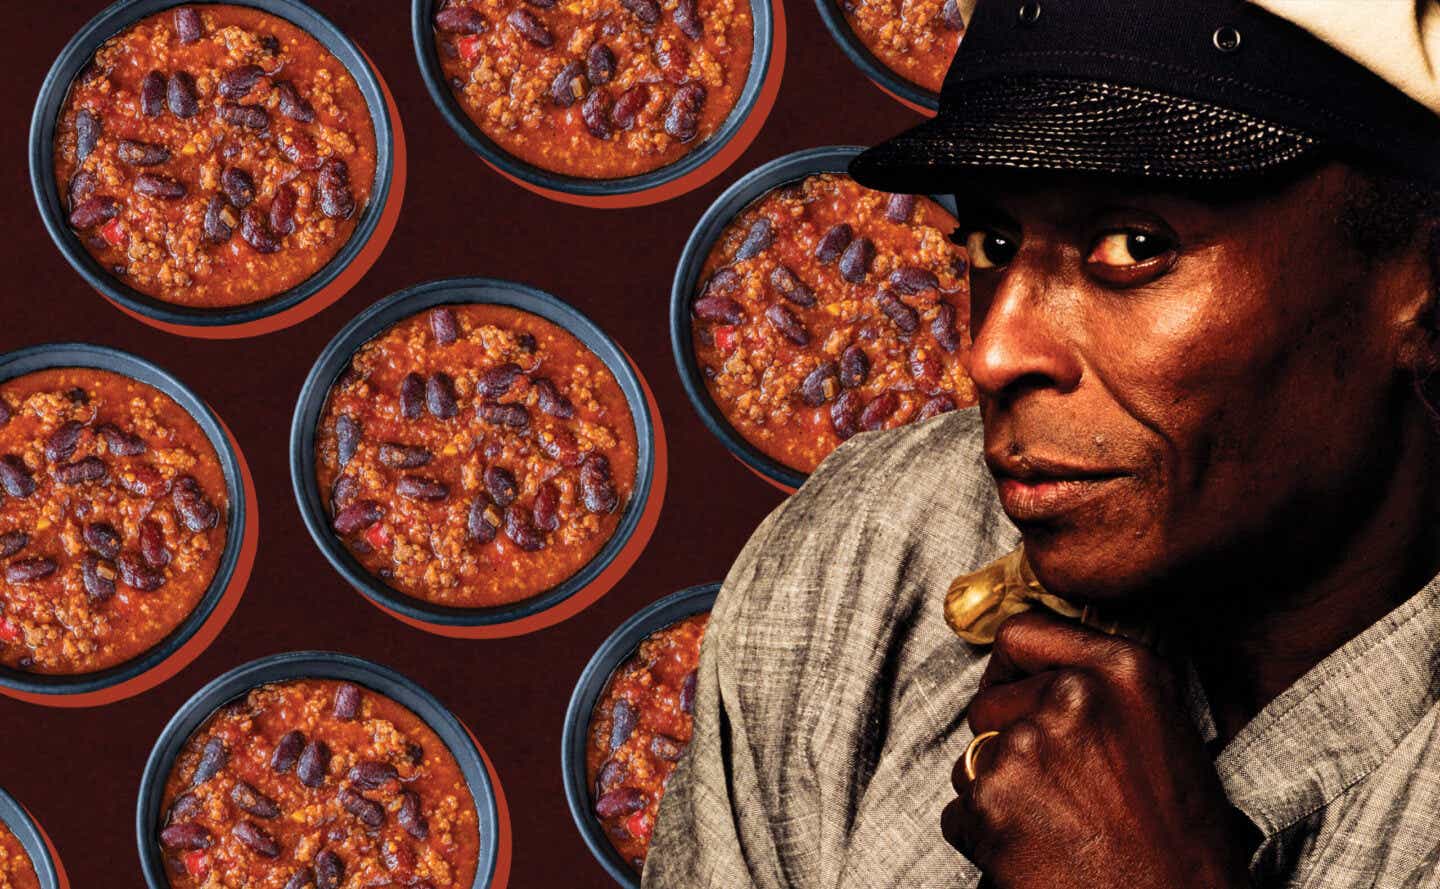 Miles Davis in front of chili